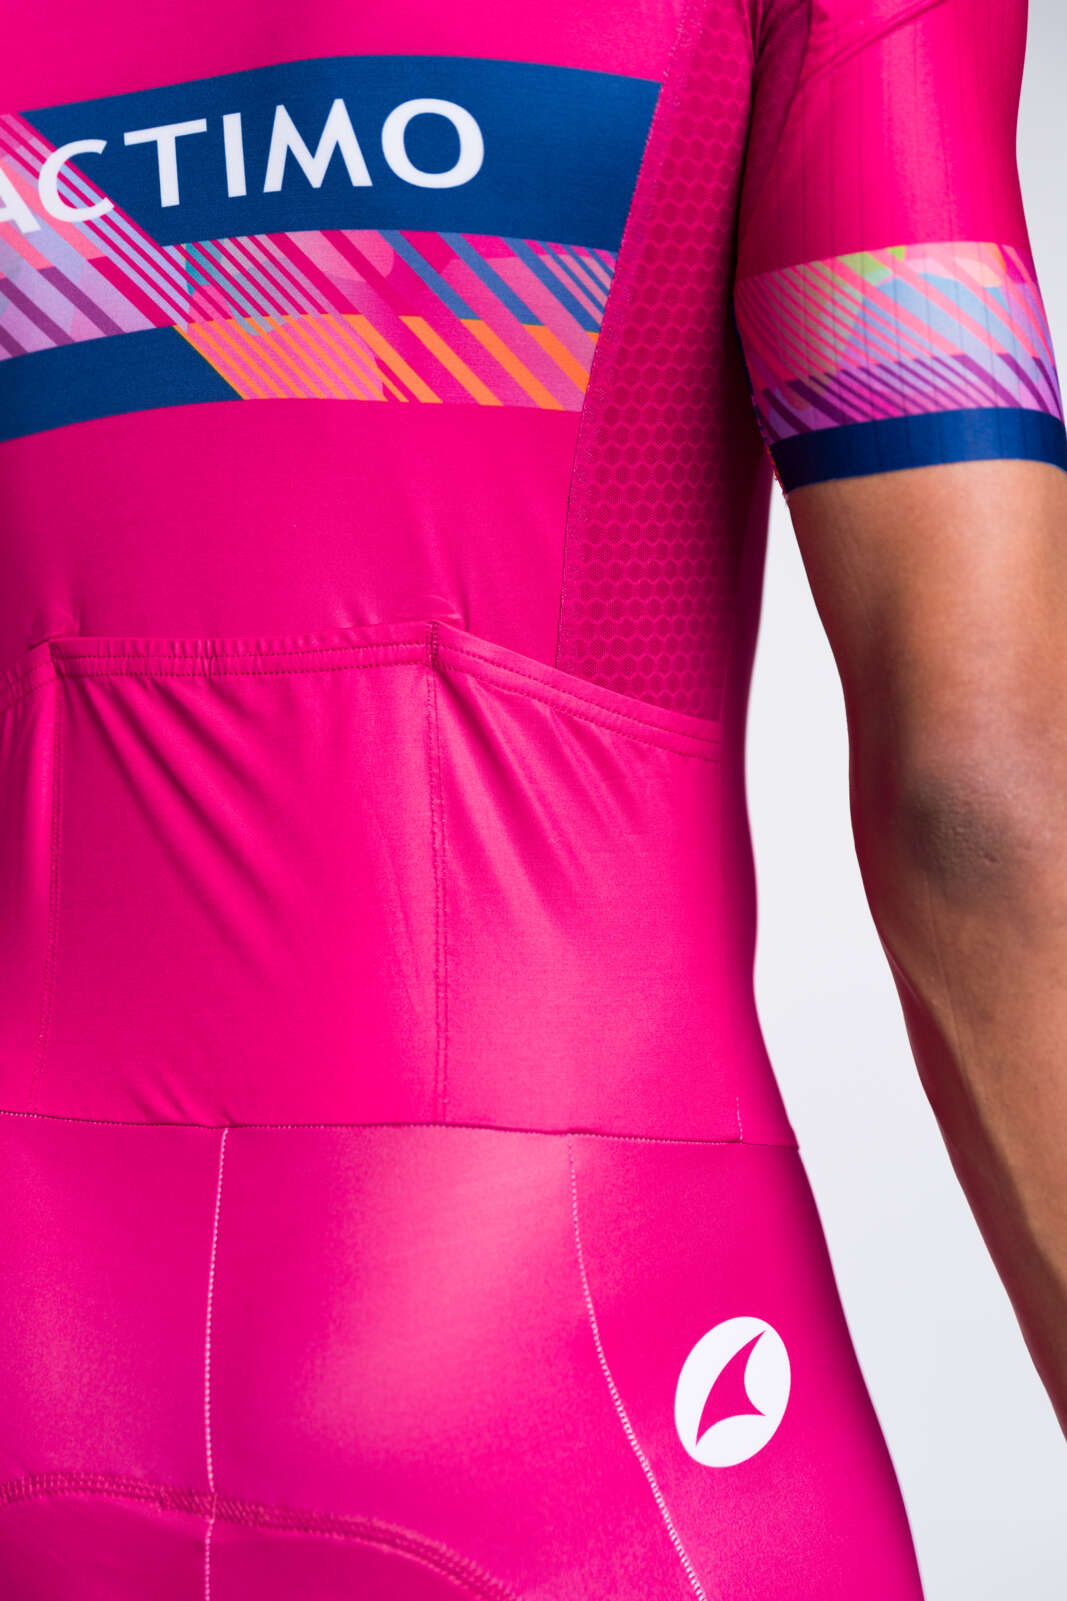 Men's Custom Lightweight Cycling Skinsuit - Flyte Rear Pockets View #color-options_fully-printed